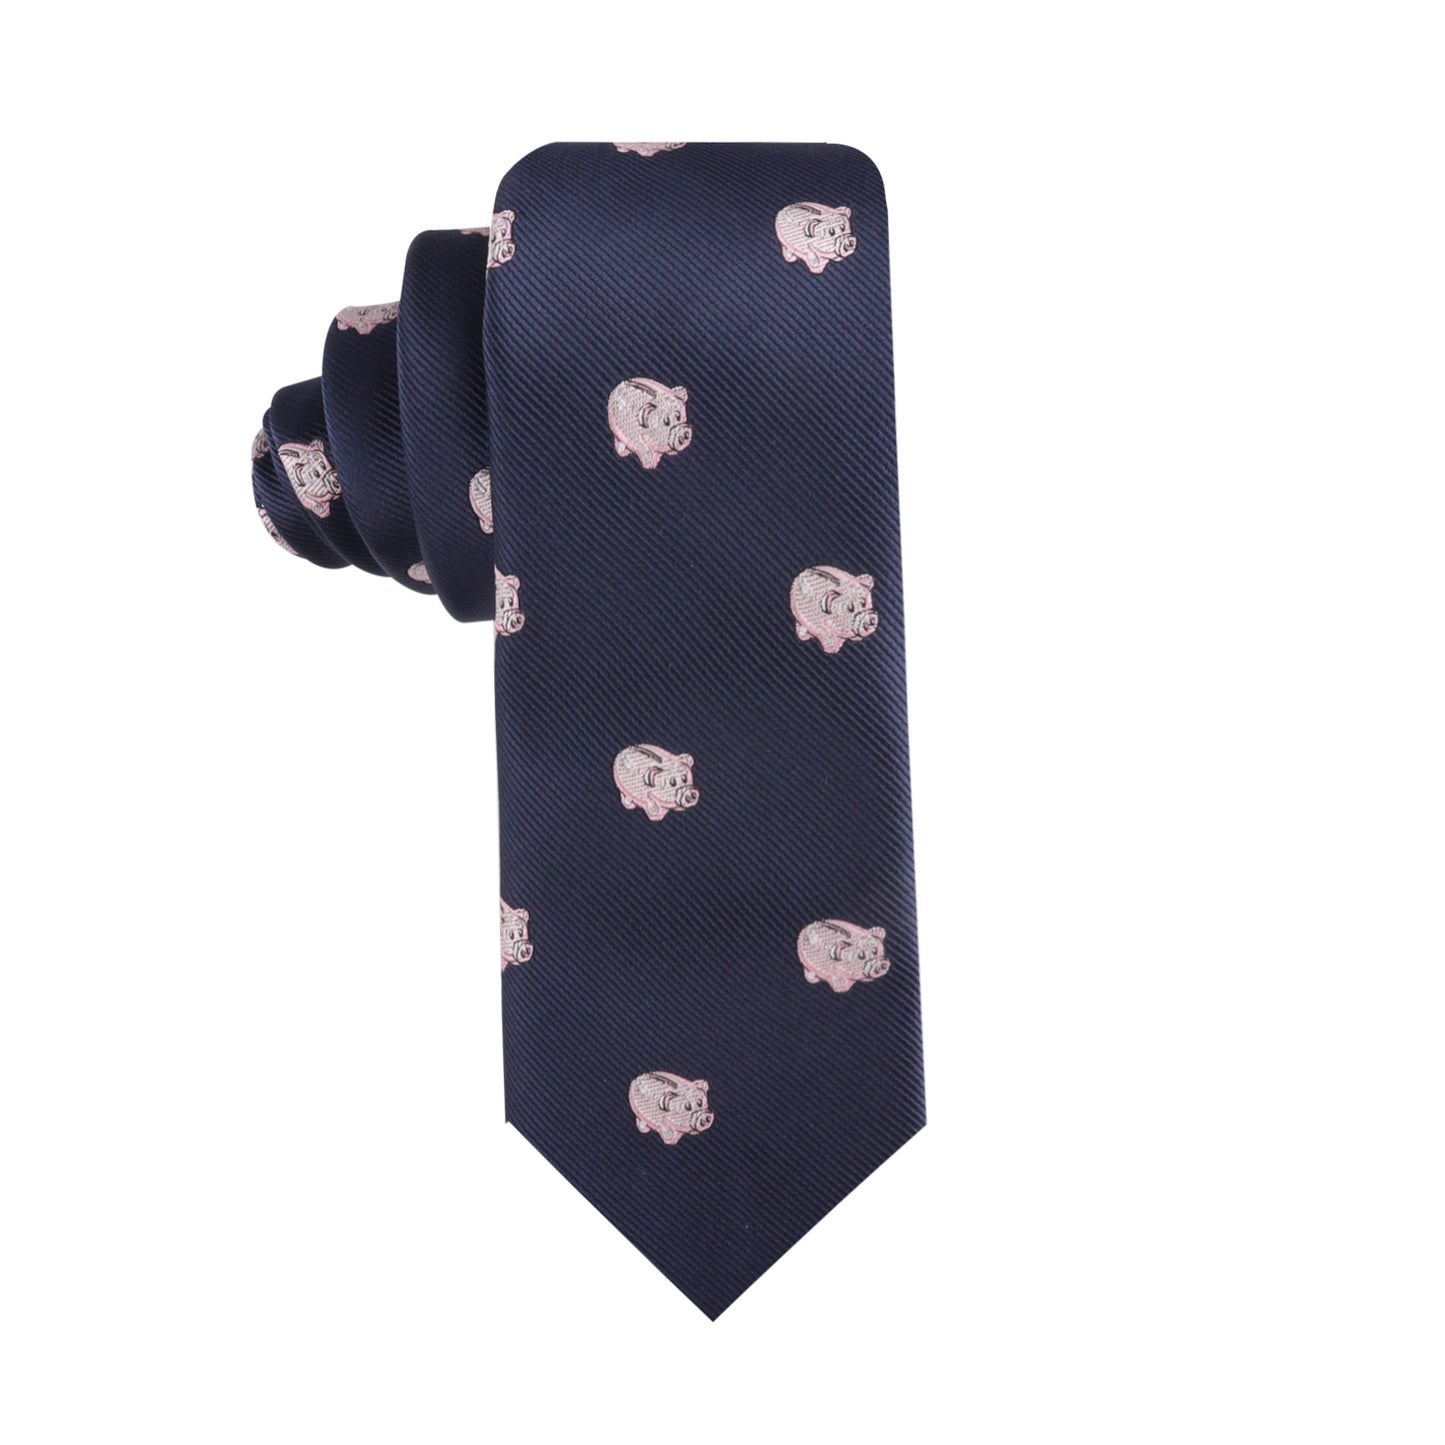 A Piggy Bank Skinny Tie adorned with small pink pig illustrations is rolled and displayed against a white background, making it a standout piece for those looking to invest in sophistication.